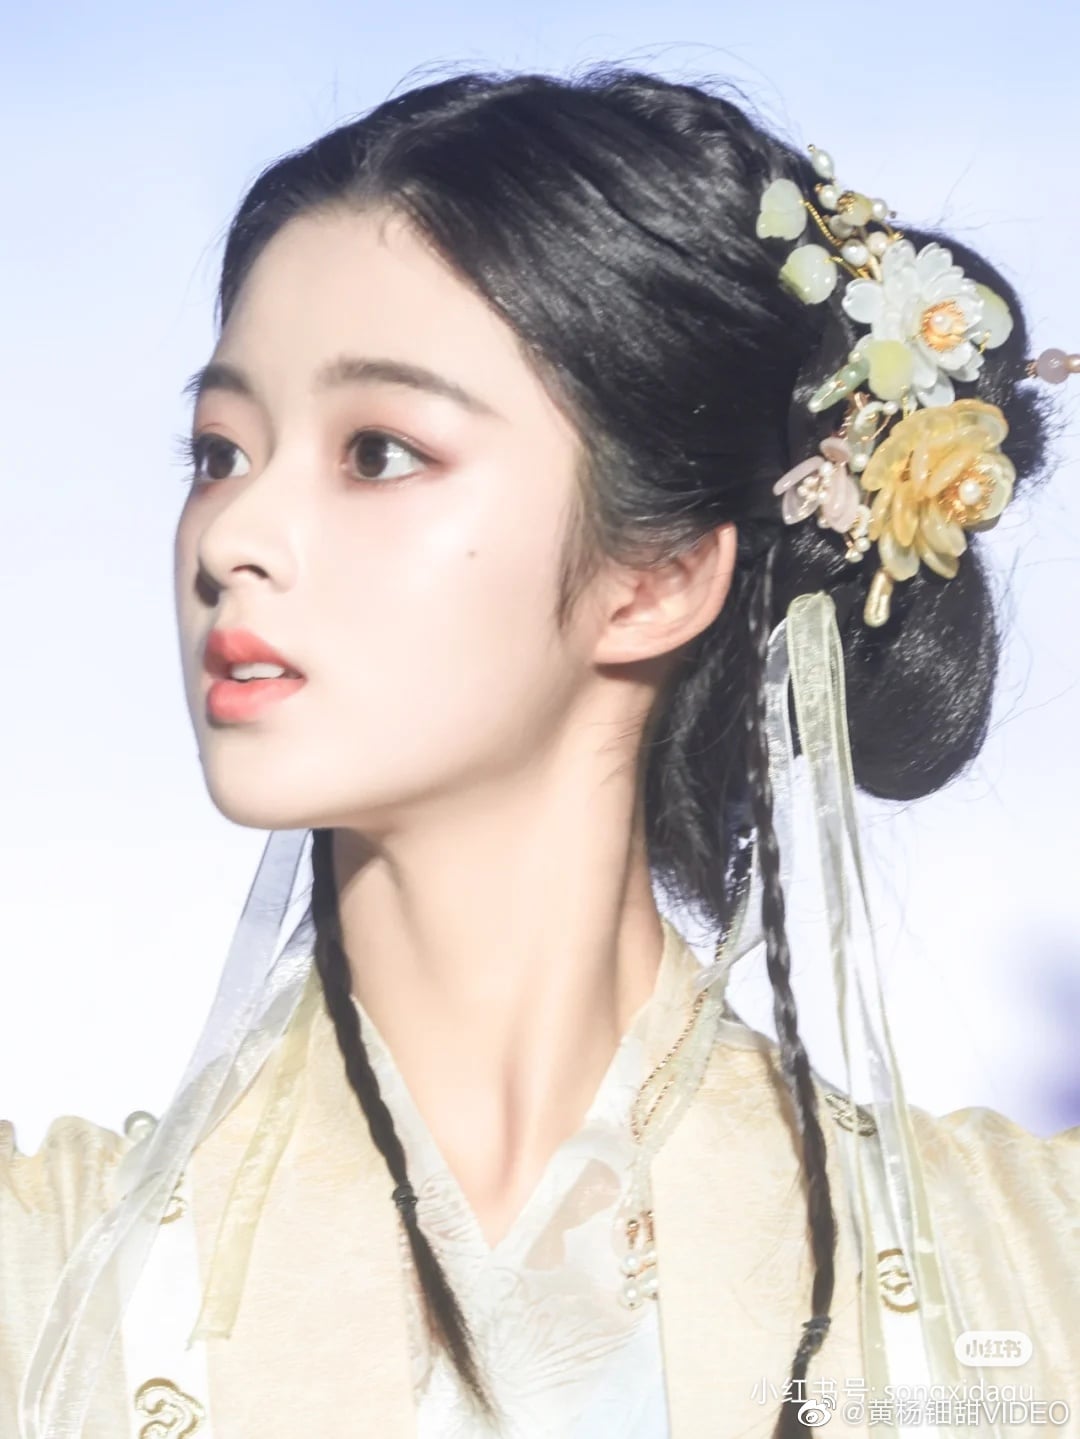 Girls 14, 15 years old have been praised as " billion-billion-dollar fairy"  compare with Liu Yifei - 1